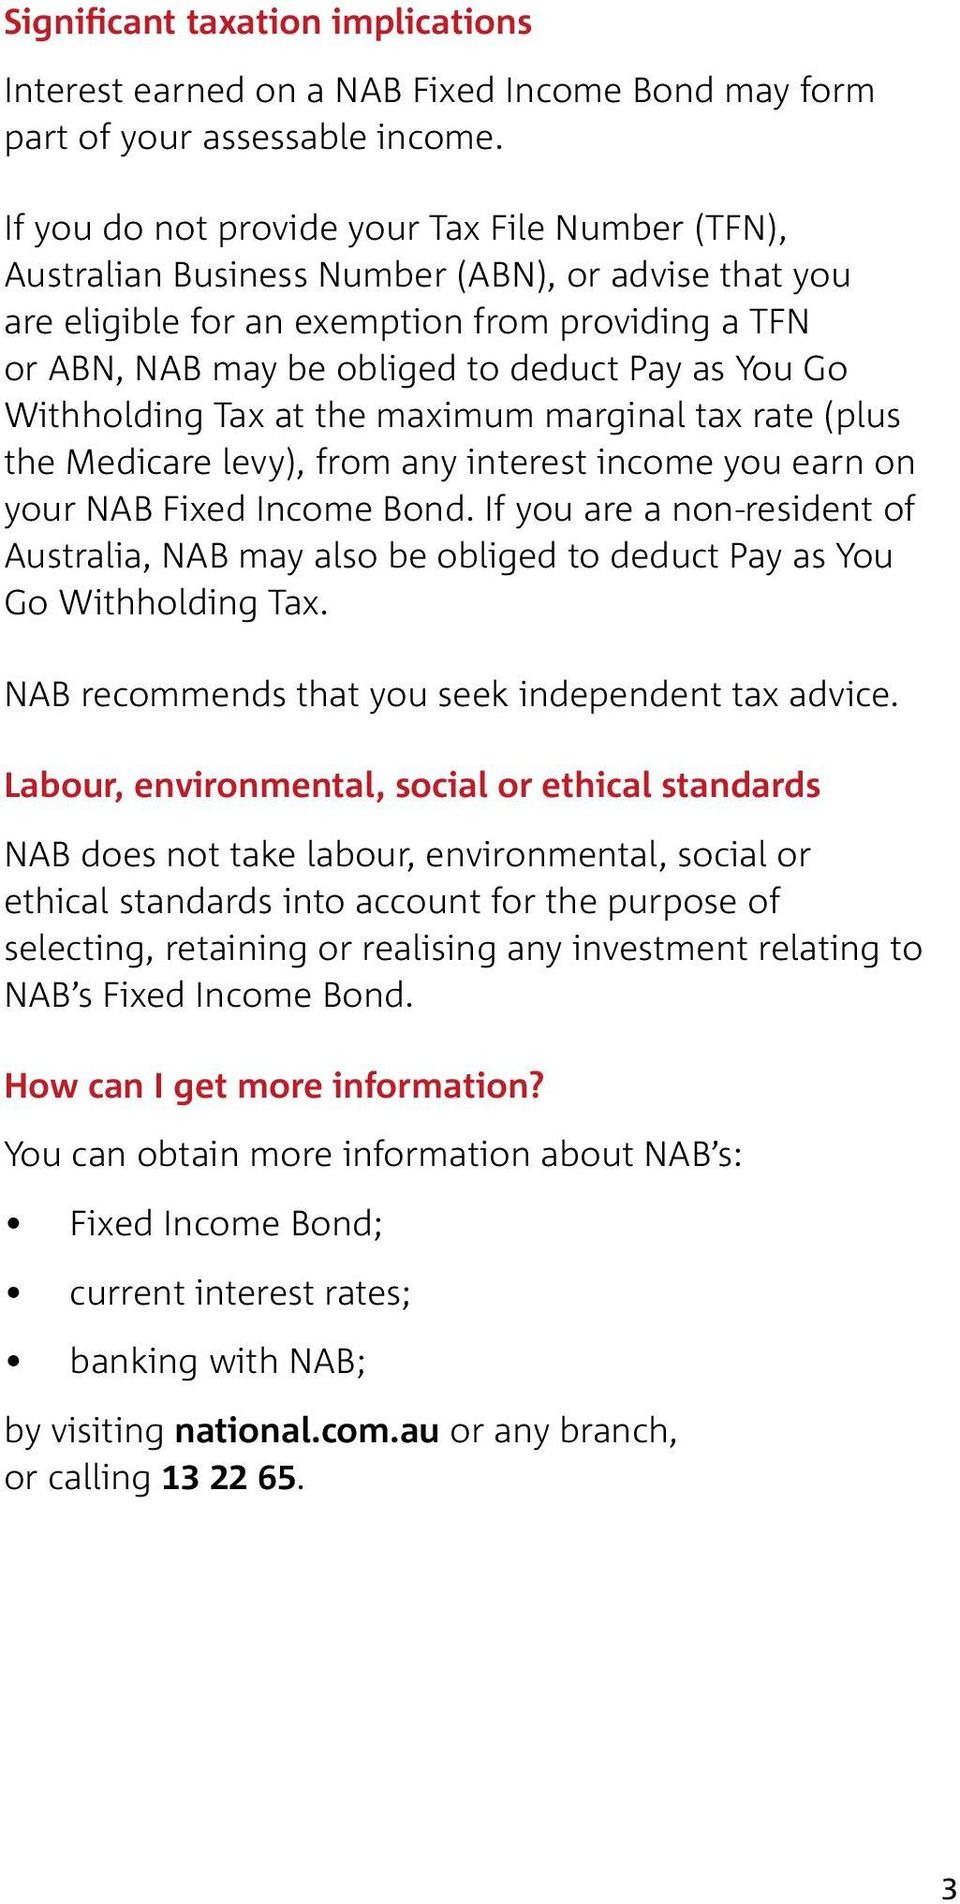 You Go Withholding Tax at the maximum marginal tax rate (plus the Medicare levy), from any interest income you earn on your NAB Fixed Income Bond.